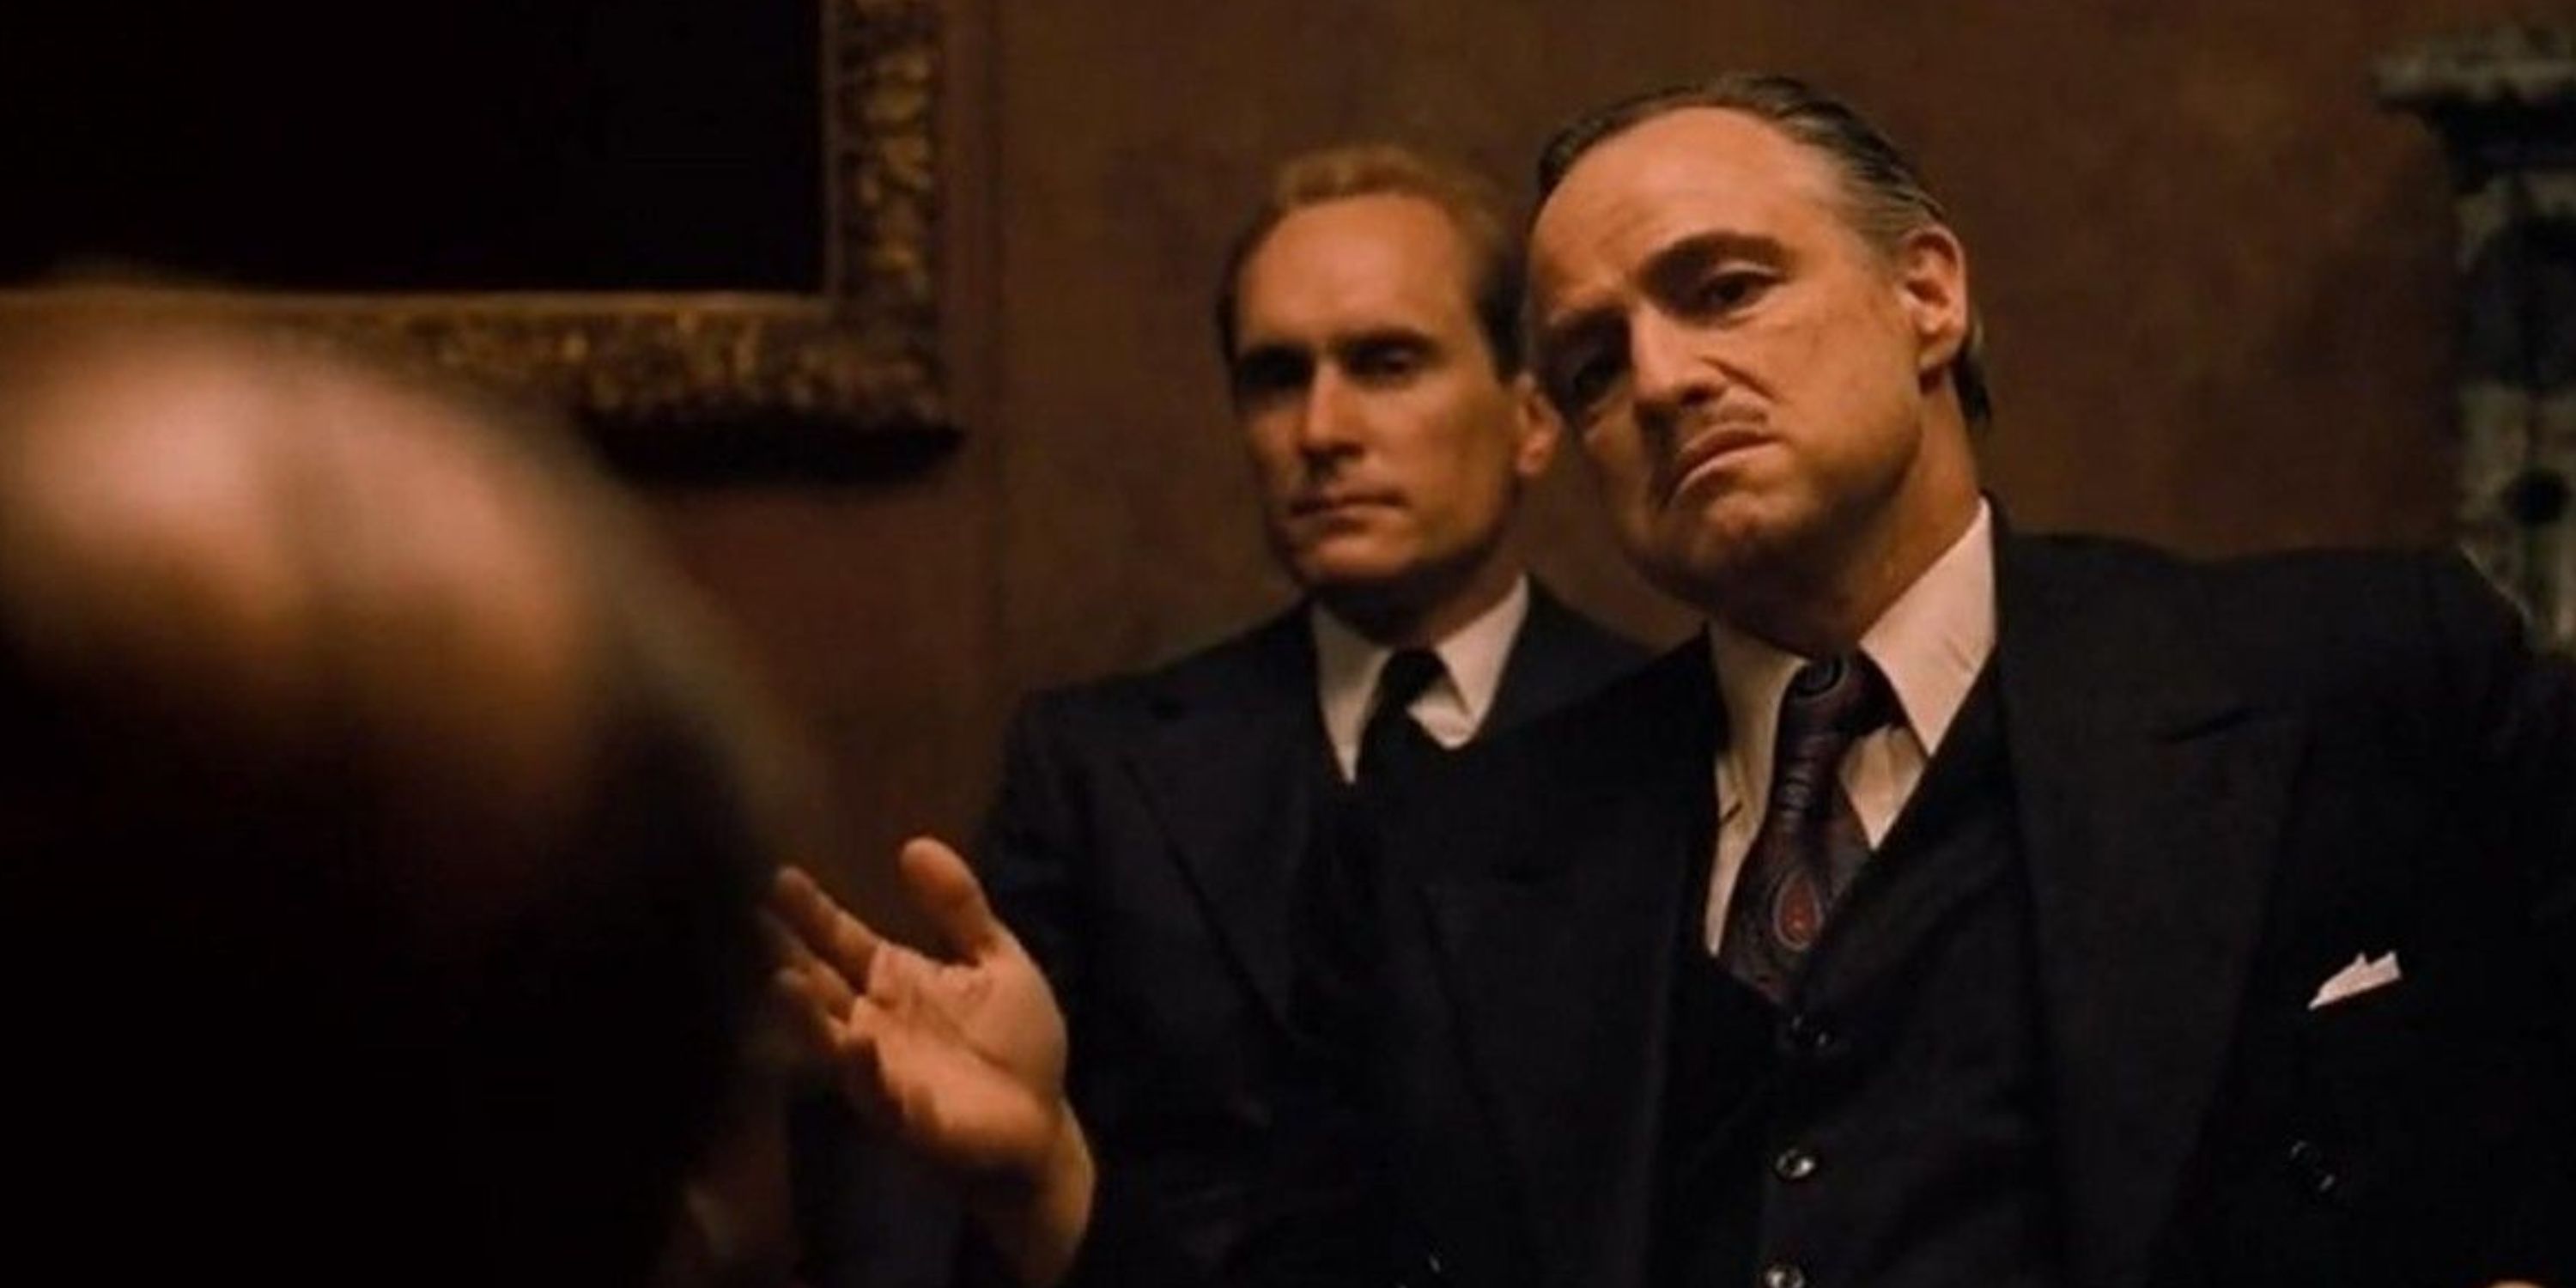 Vito Corleone with Tom Hagen meeting the bosses in The Godfather